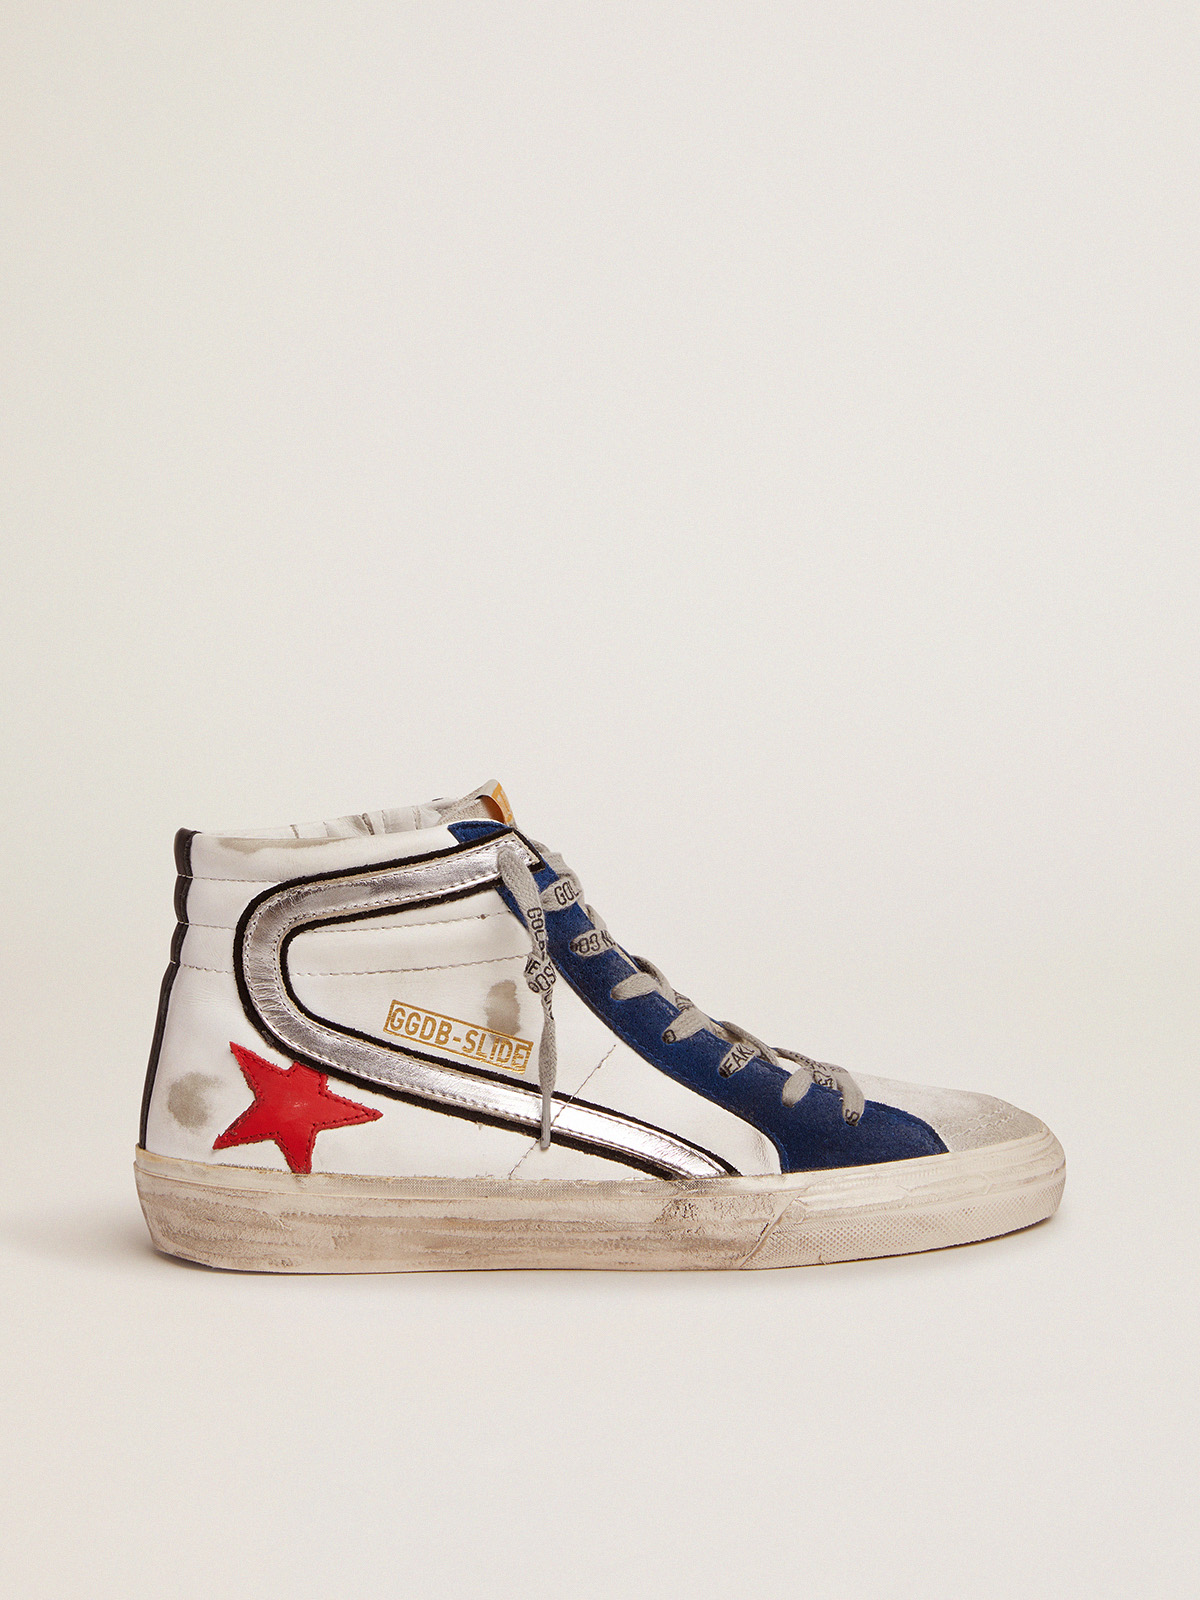 Slide sneakers in white leather with red leather star | Golden Goose